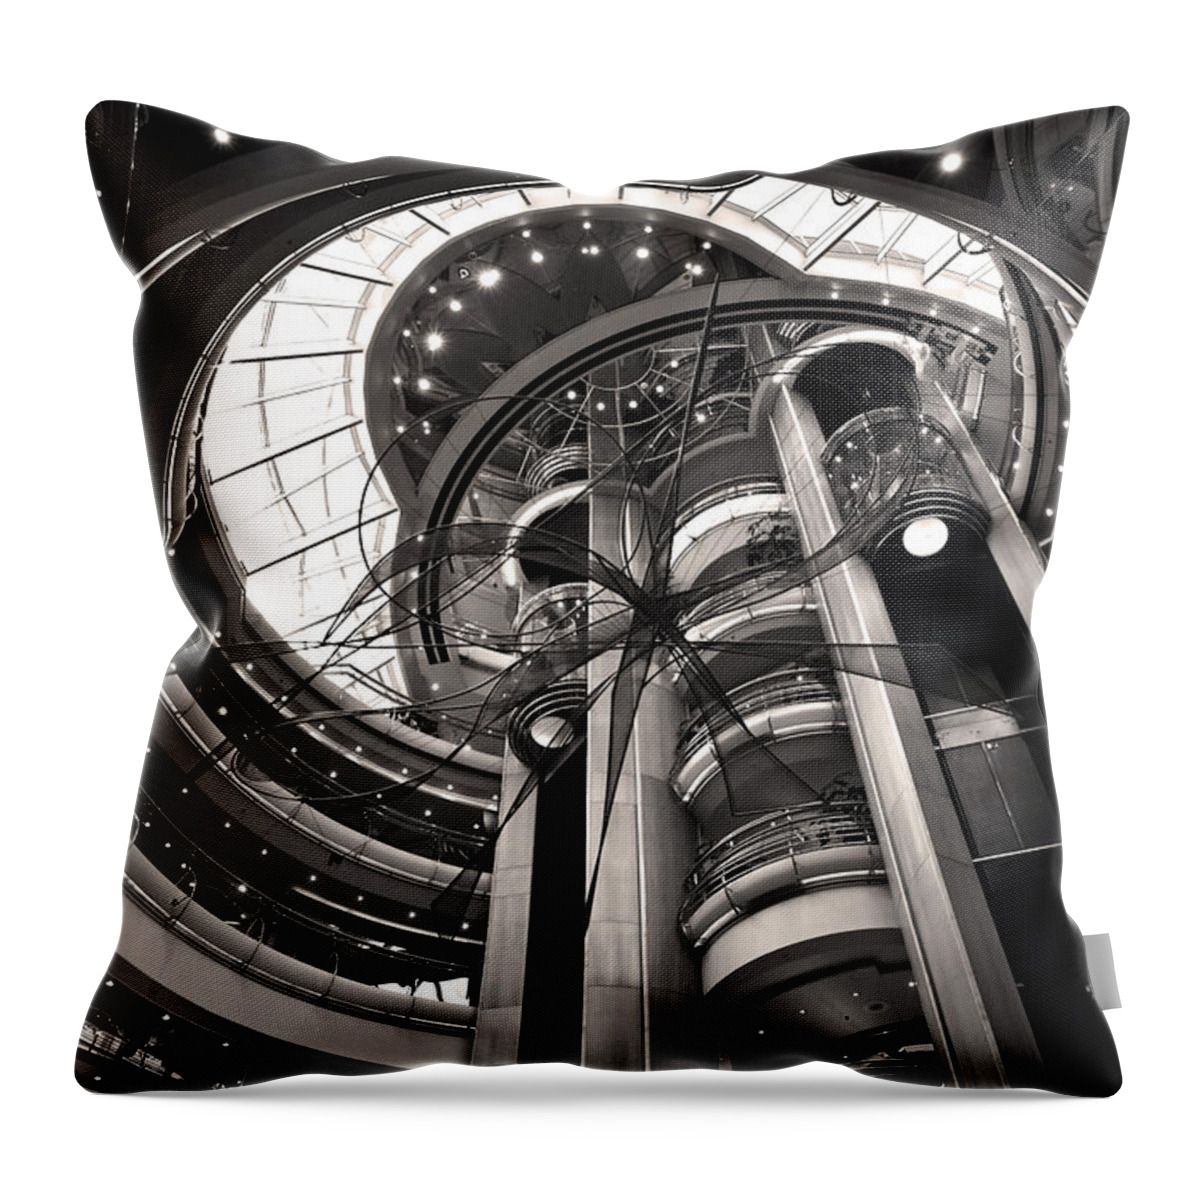 Centrum Throw Pillow featuring the photograph The Centrum by Steven Sparks